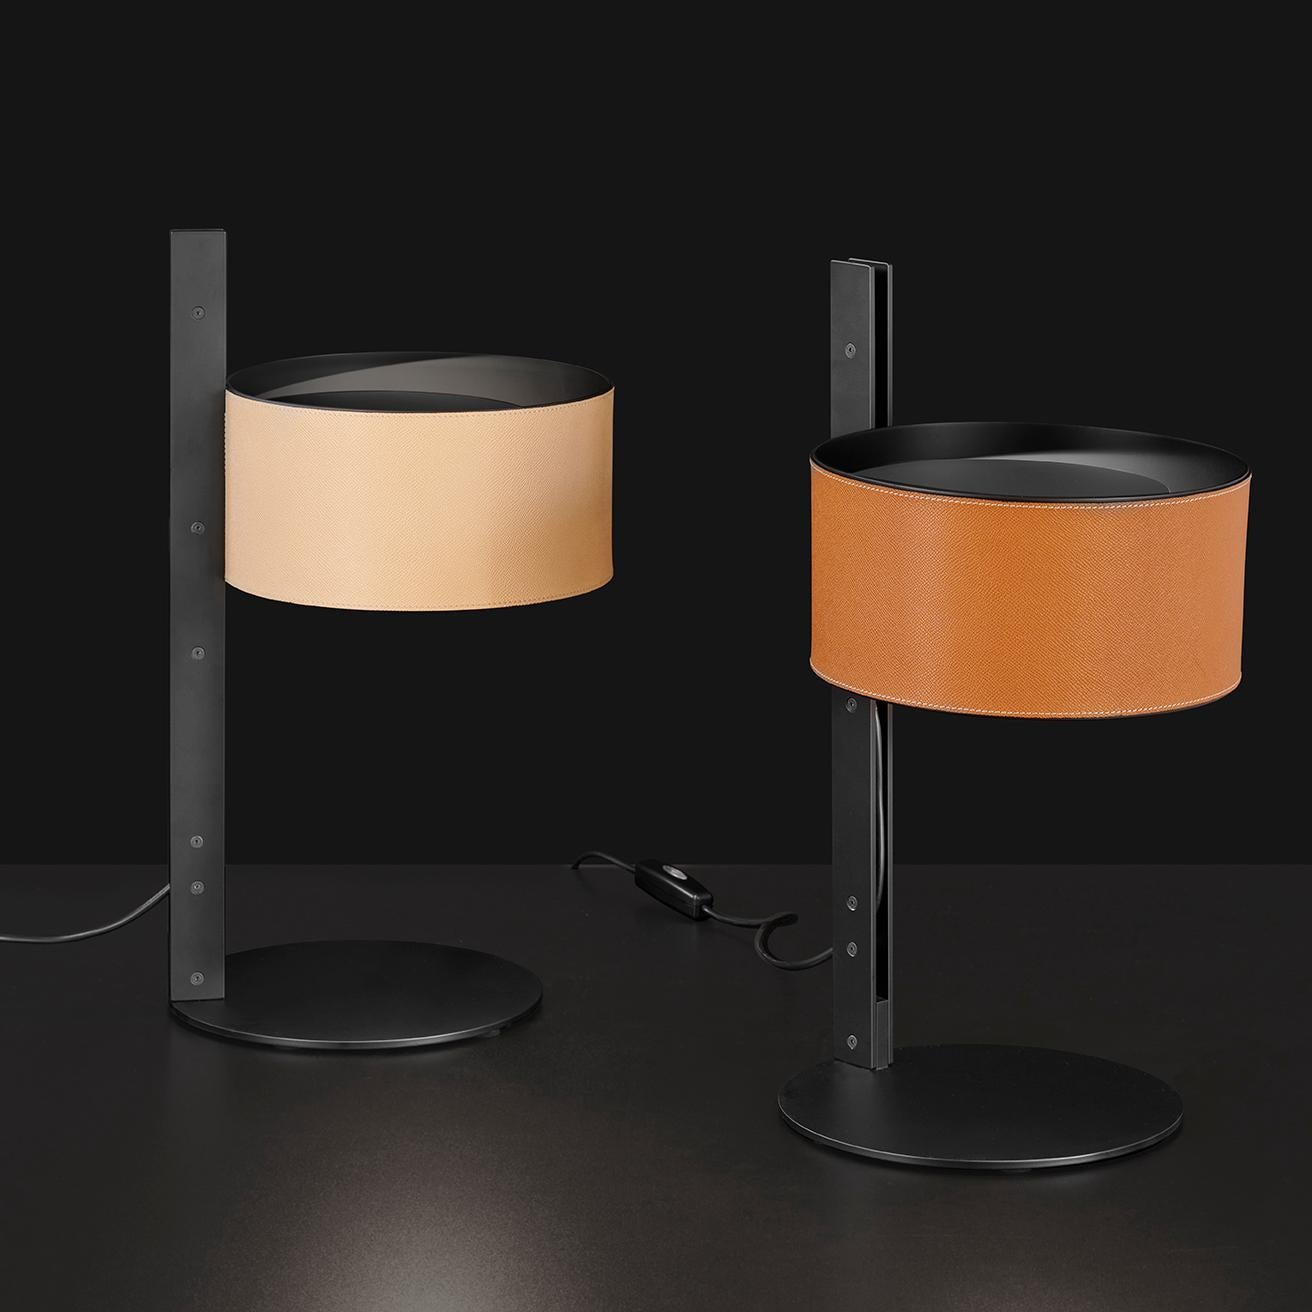 Designed by Victor Vasilev, Parallel table lamp consists of a cylindrical metal lampshade supported by a vertical stem positioned laterally. The stem has two matt-black metallic plates that are spaced apart and slide in parallel directions from the